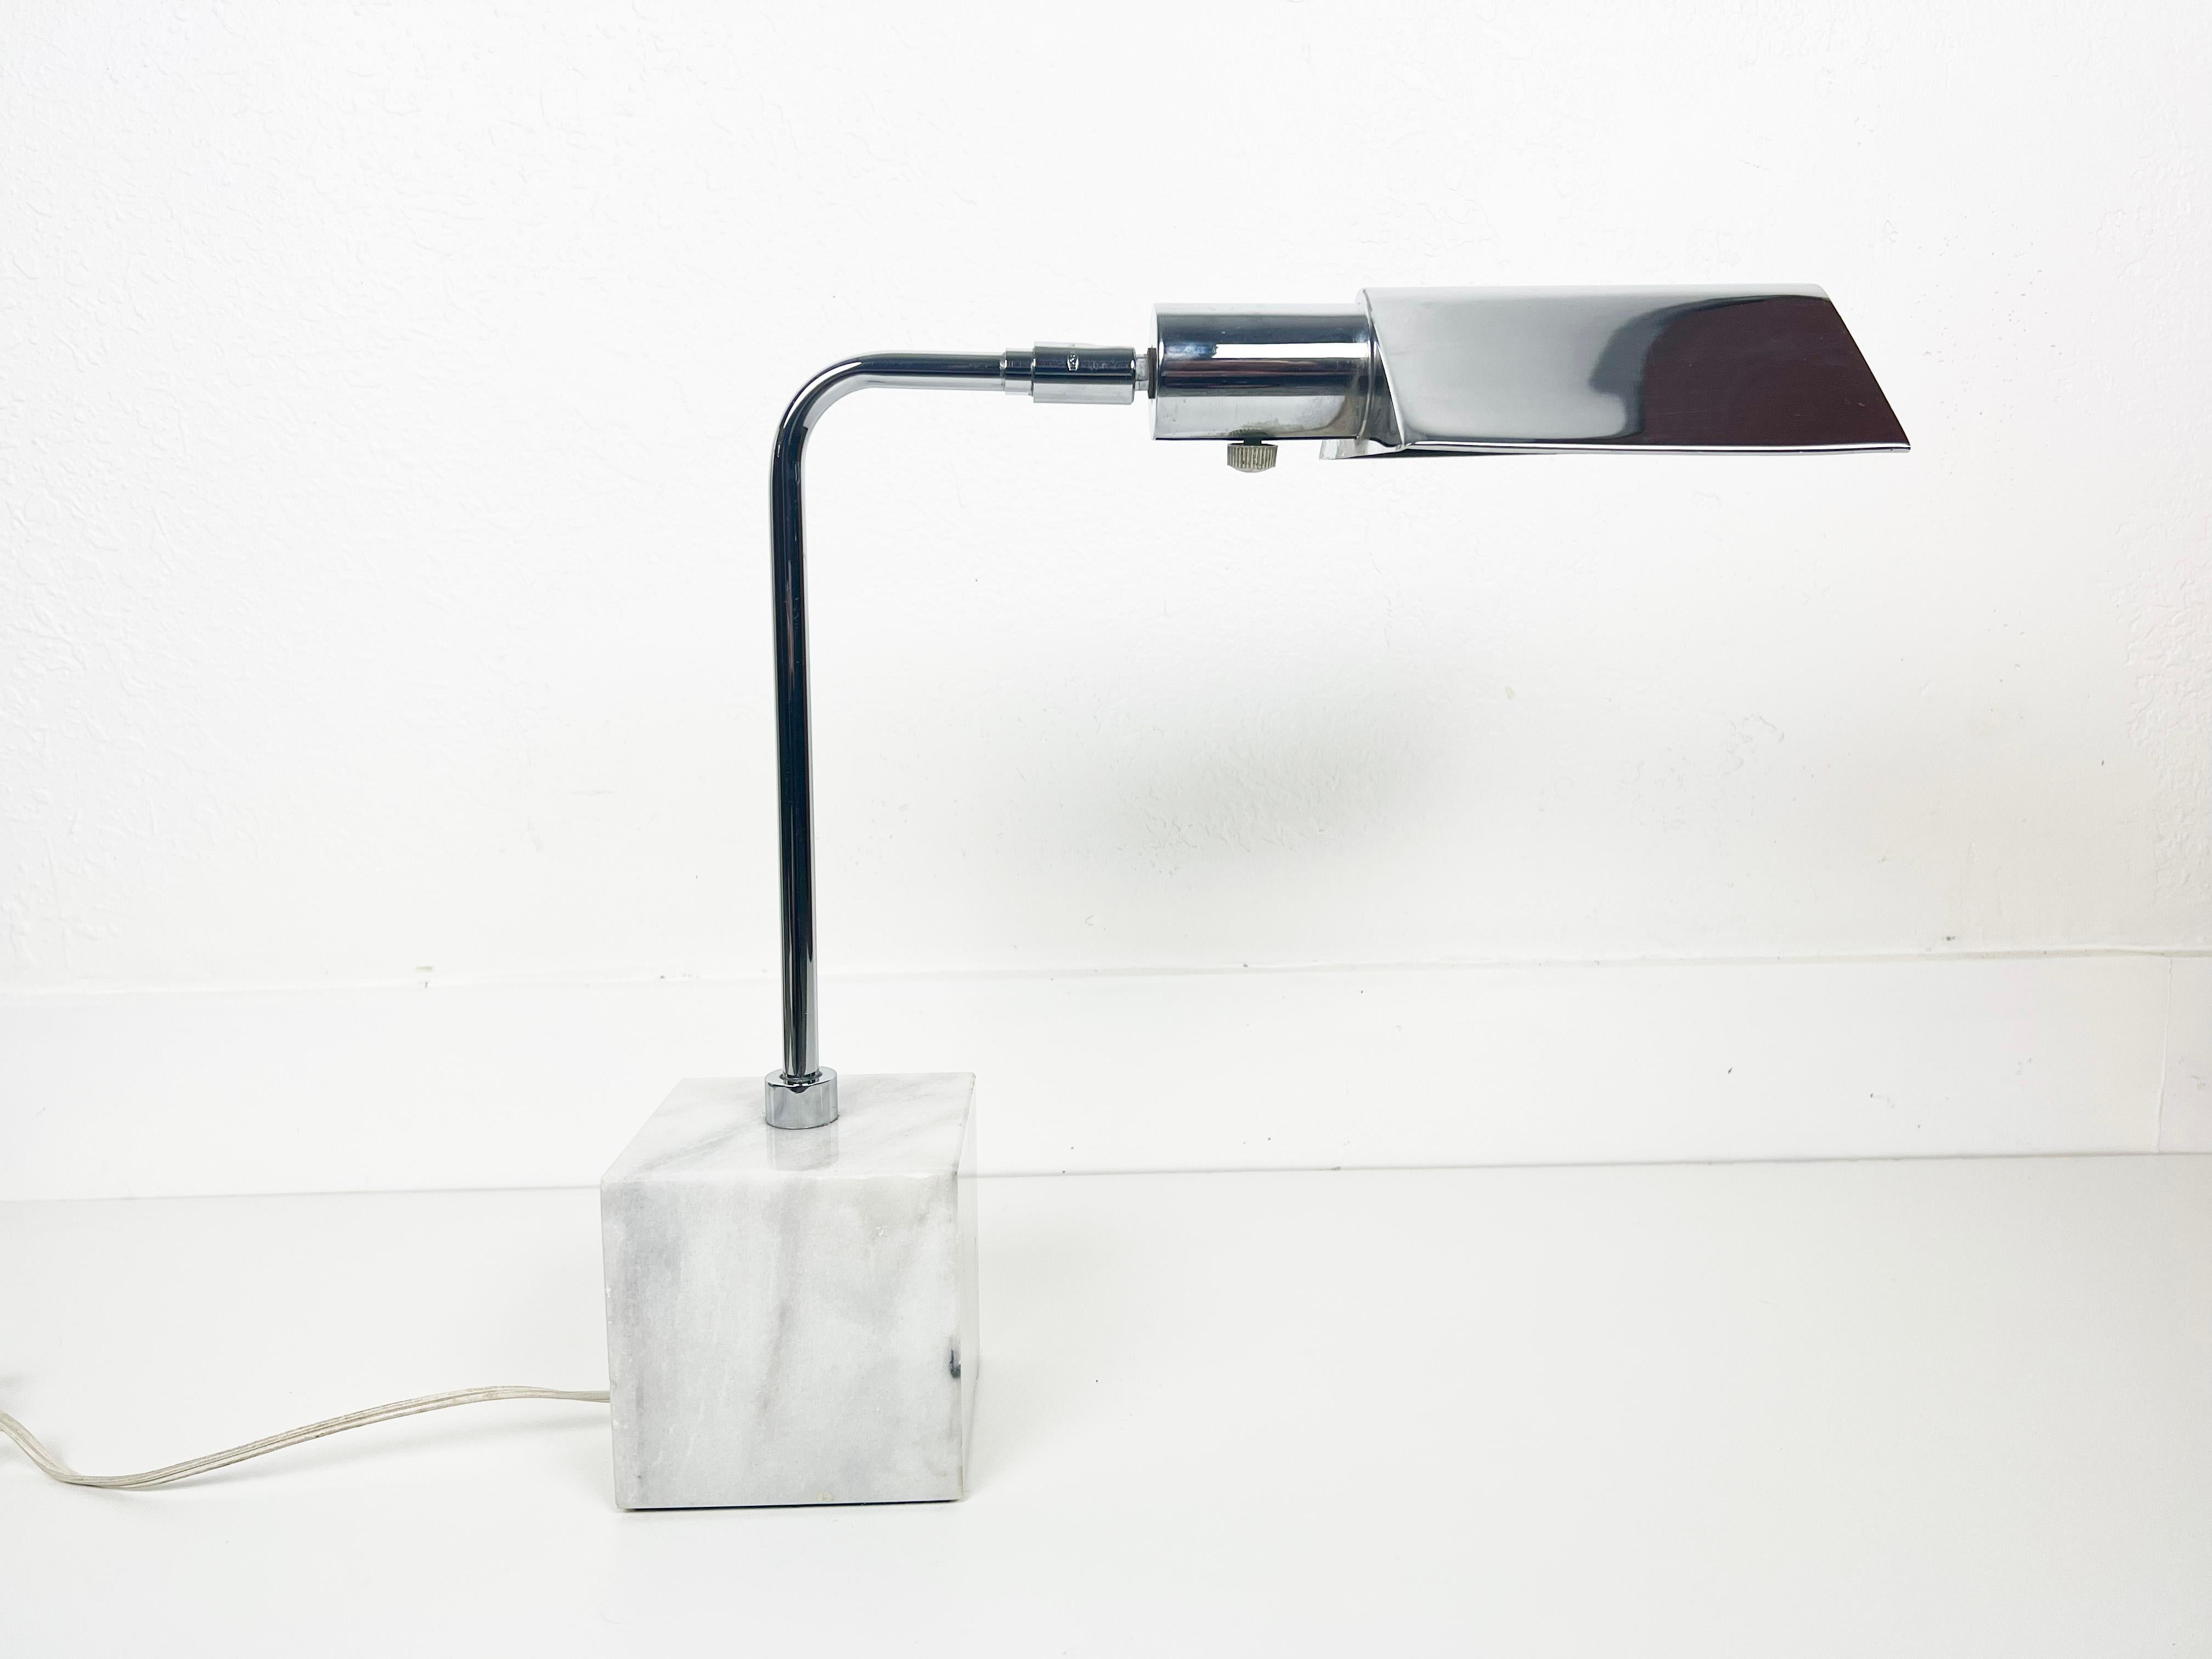 Vintage marble base chrome table lamp by Koch and Lowy with adjustable shade. Signed.

Manufacturer: Koch and Lowy

Year: 1960s

Style: Mid-Century Modern

Dimensions: 16